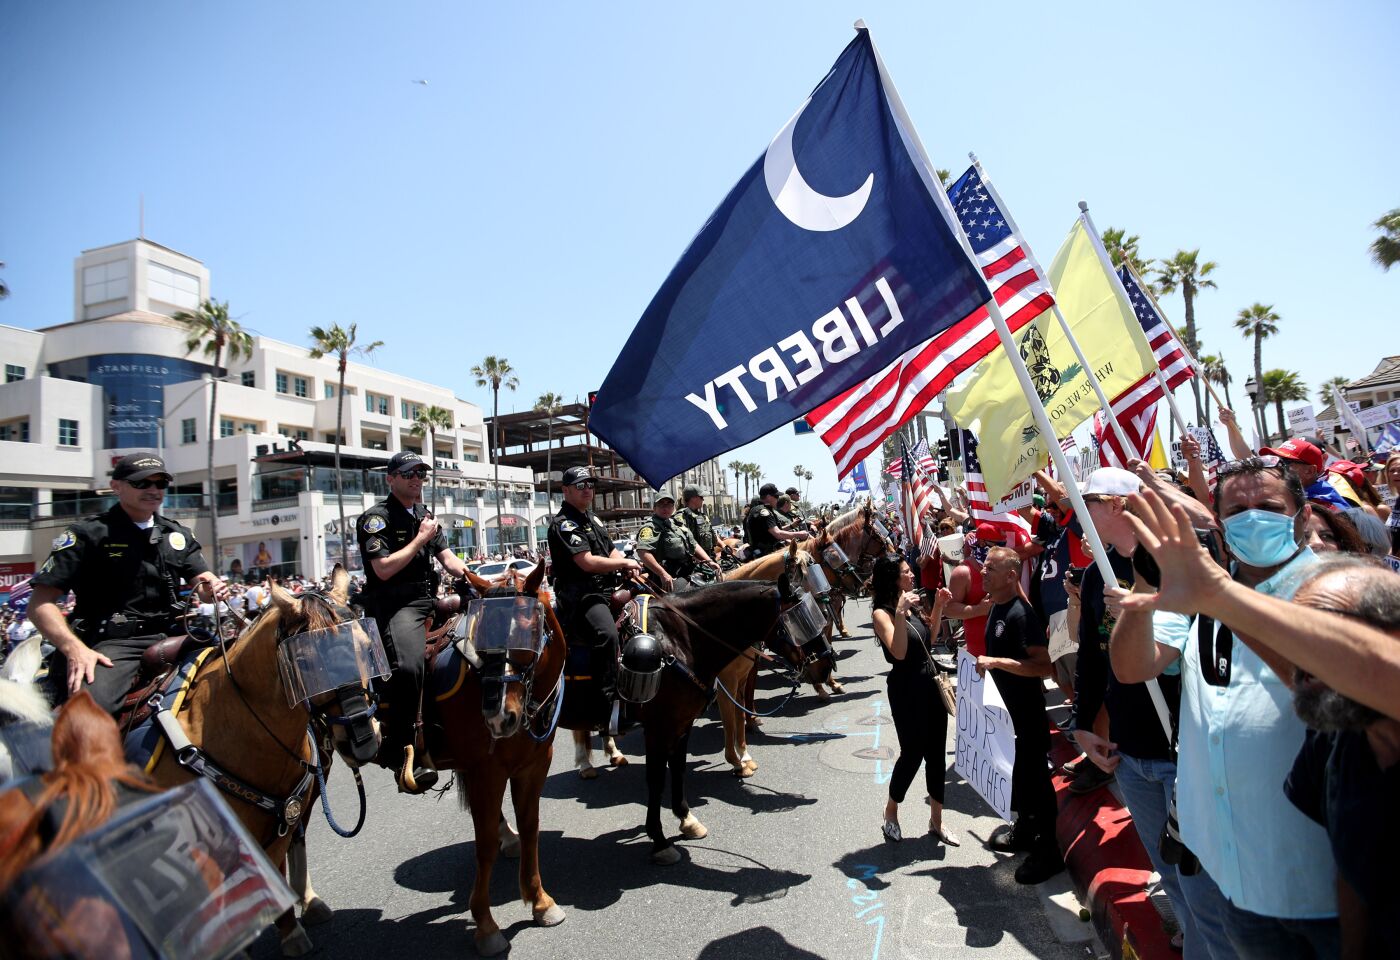 Police officers on horseback keep people away from the street during the protest in Huntington Beach on Friday.